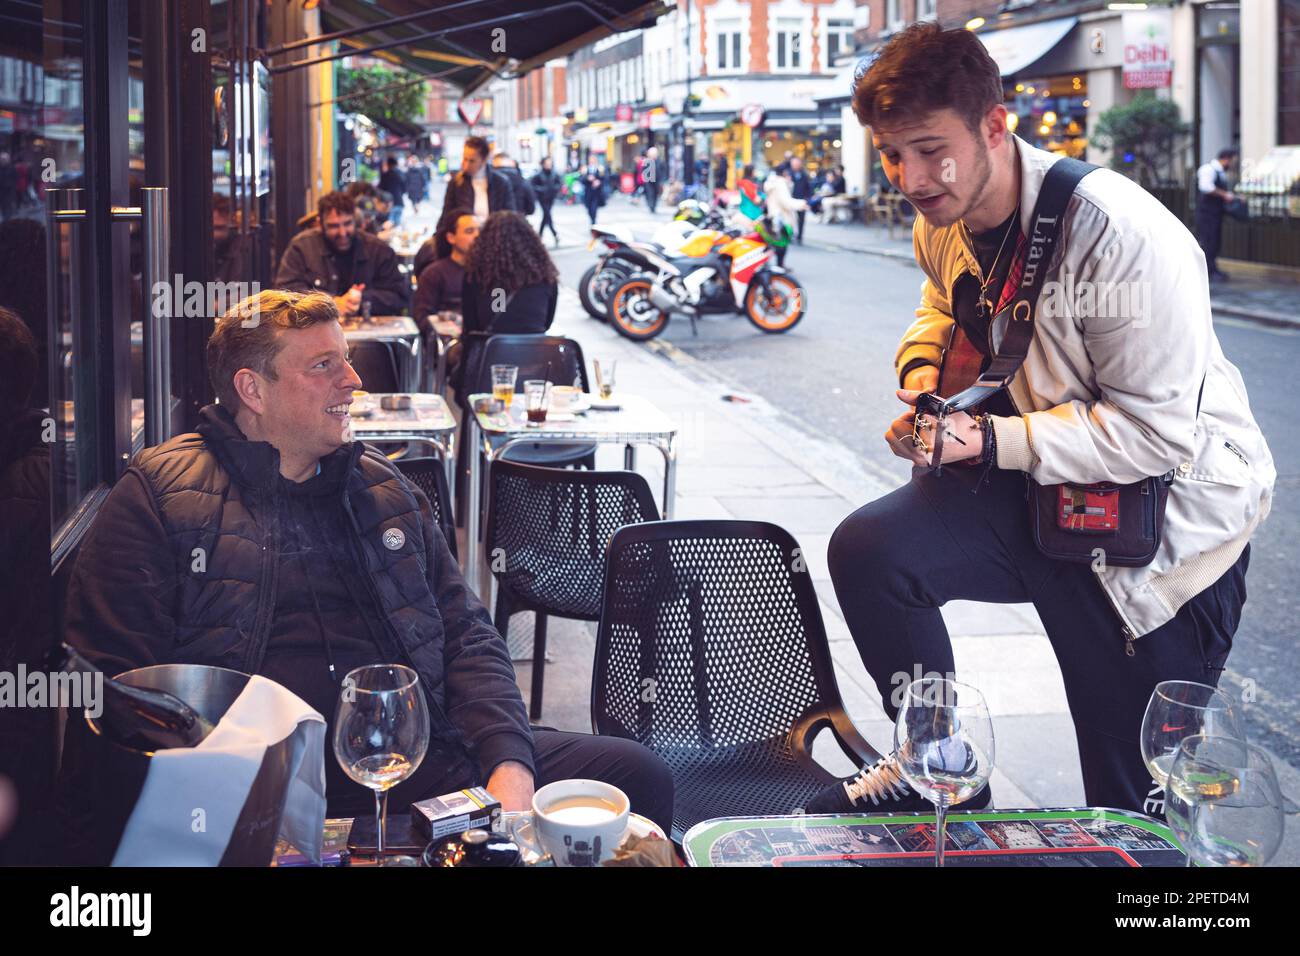 Thomas Henry Skinner the English businessman and television personality enjoys the young ukelele rapper in Soho, Liam C, cloudy winter London 2023 Stock Photo